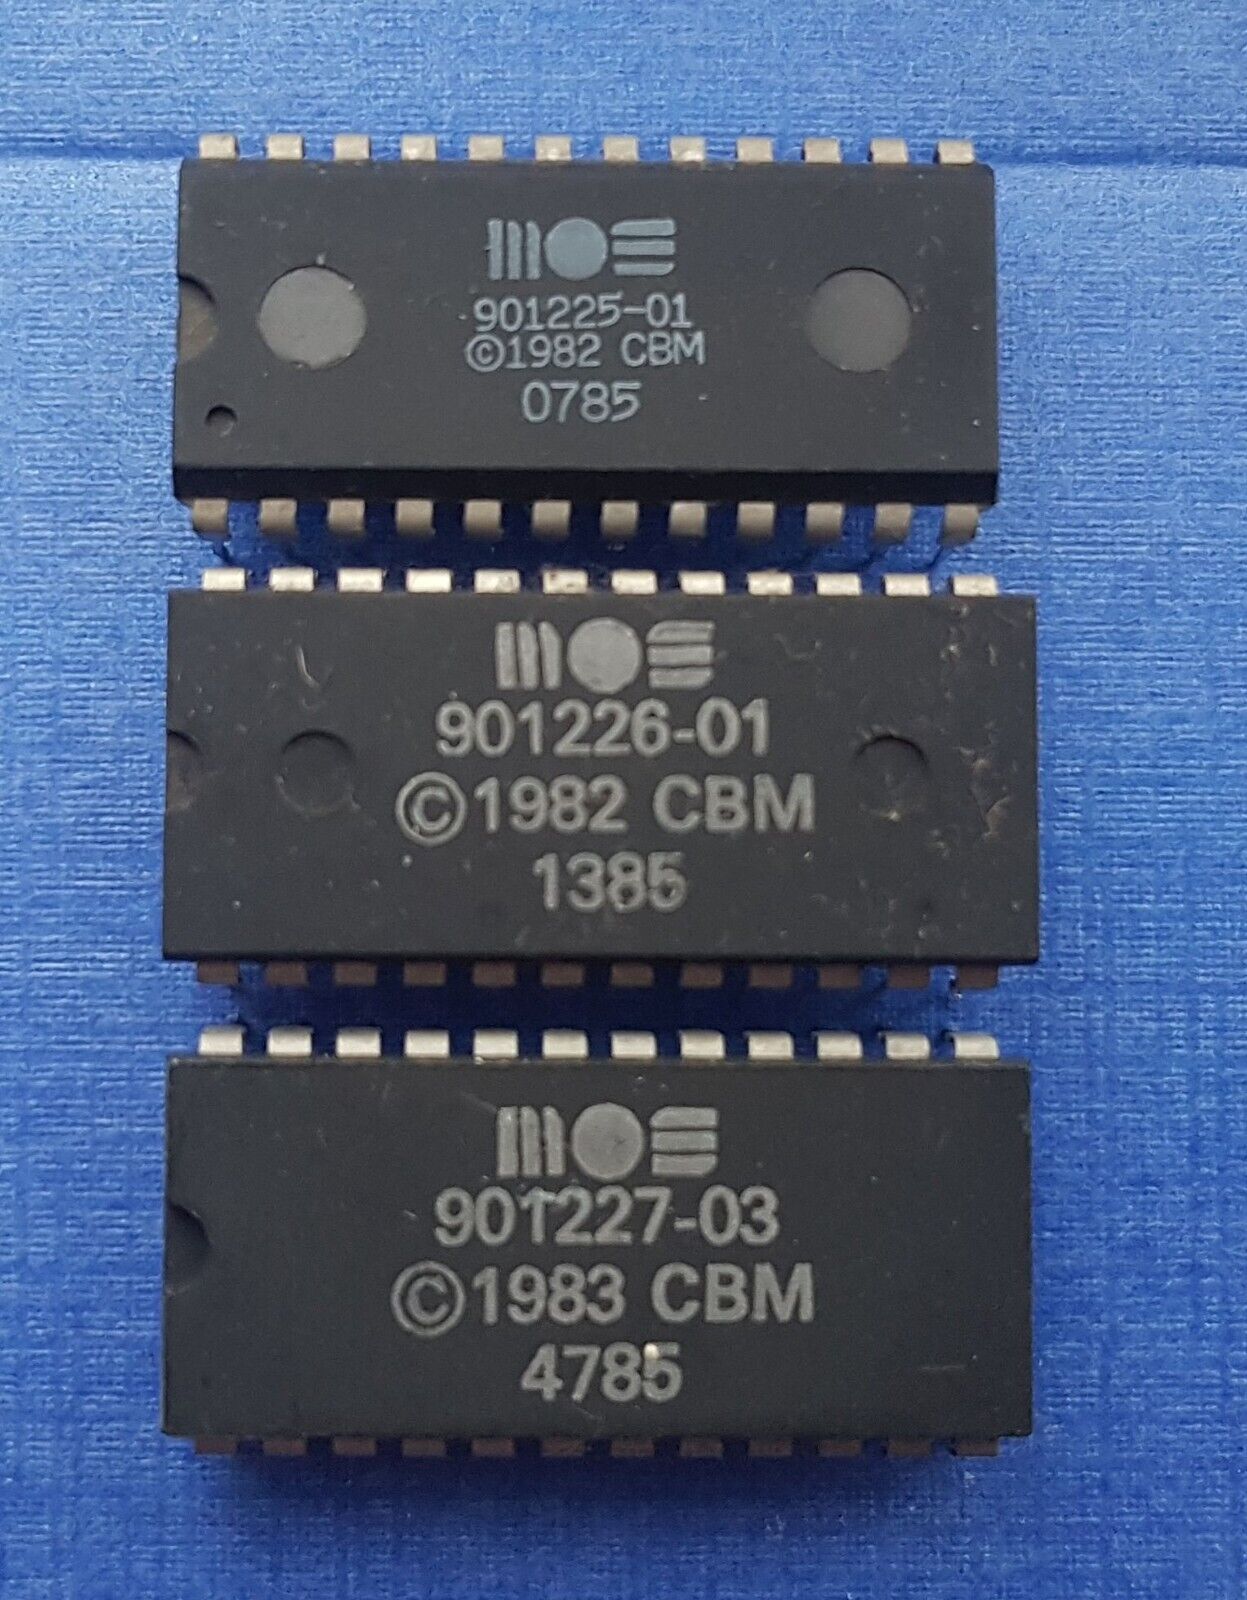 MOS 901225-01/901226-01/901227-03 ROM set Chips for COMMODORE 64 in ESD box.